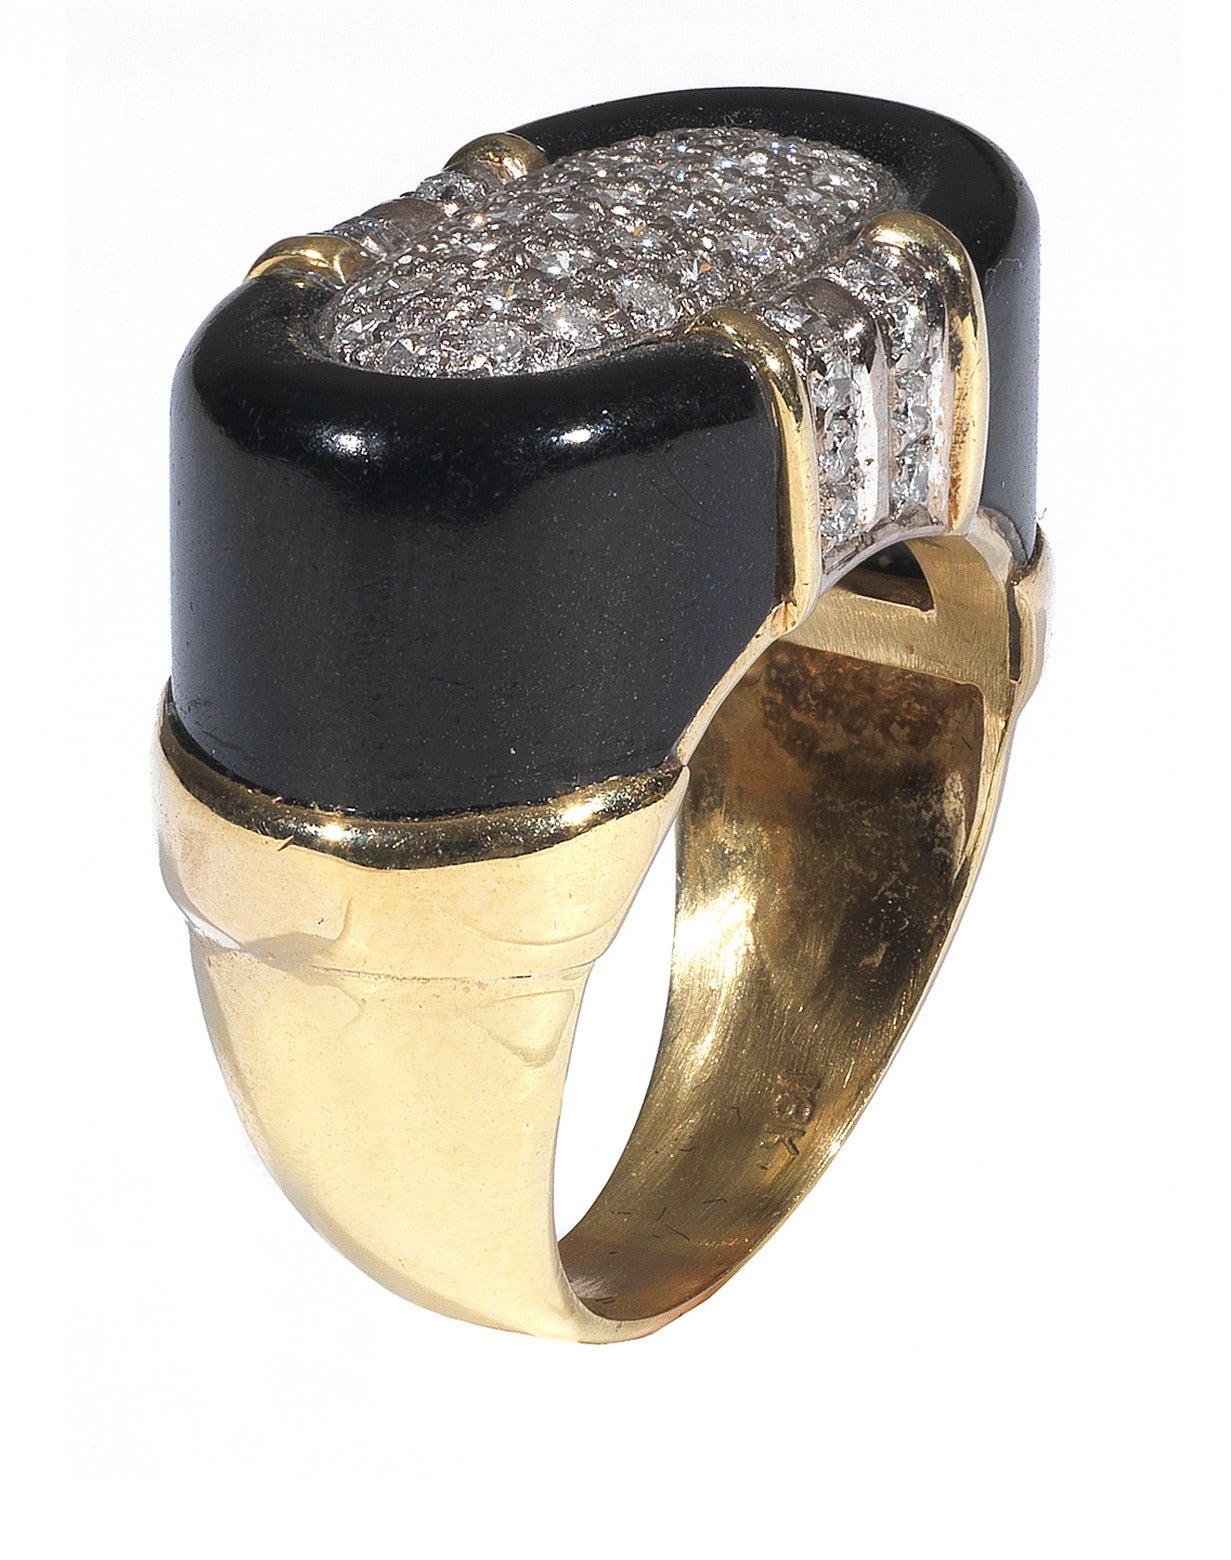 
Of architectural design, the ring mounted with a central panel of pavé-set circular-cut diamond to the onyx sides

Size 7